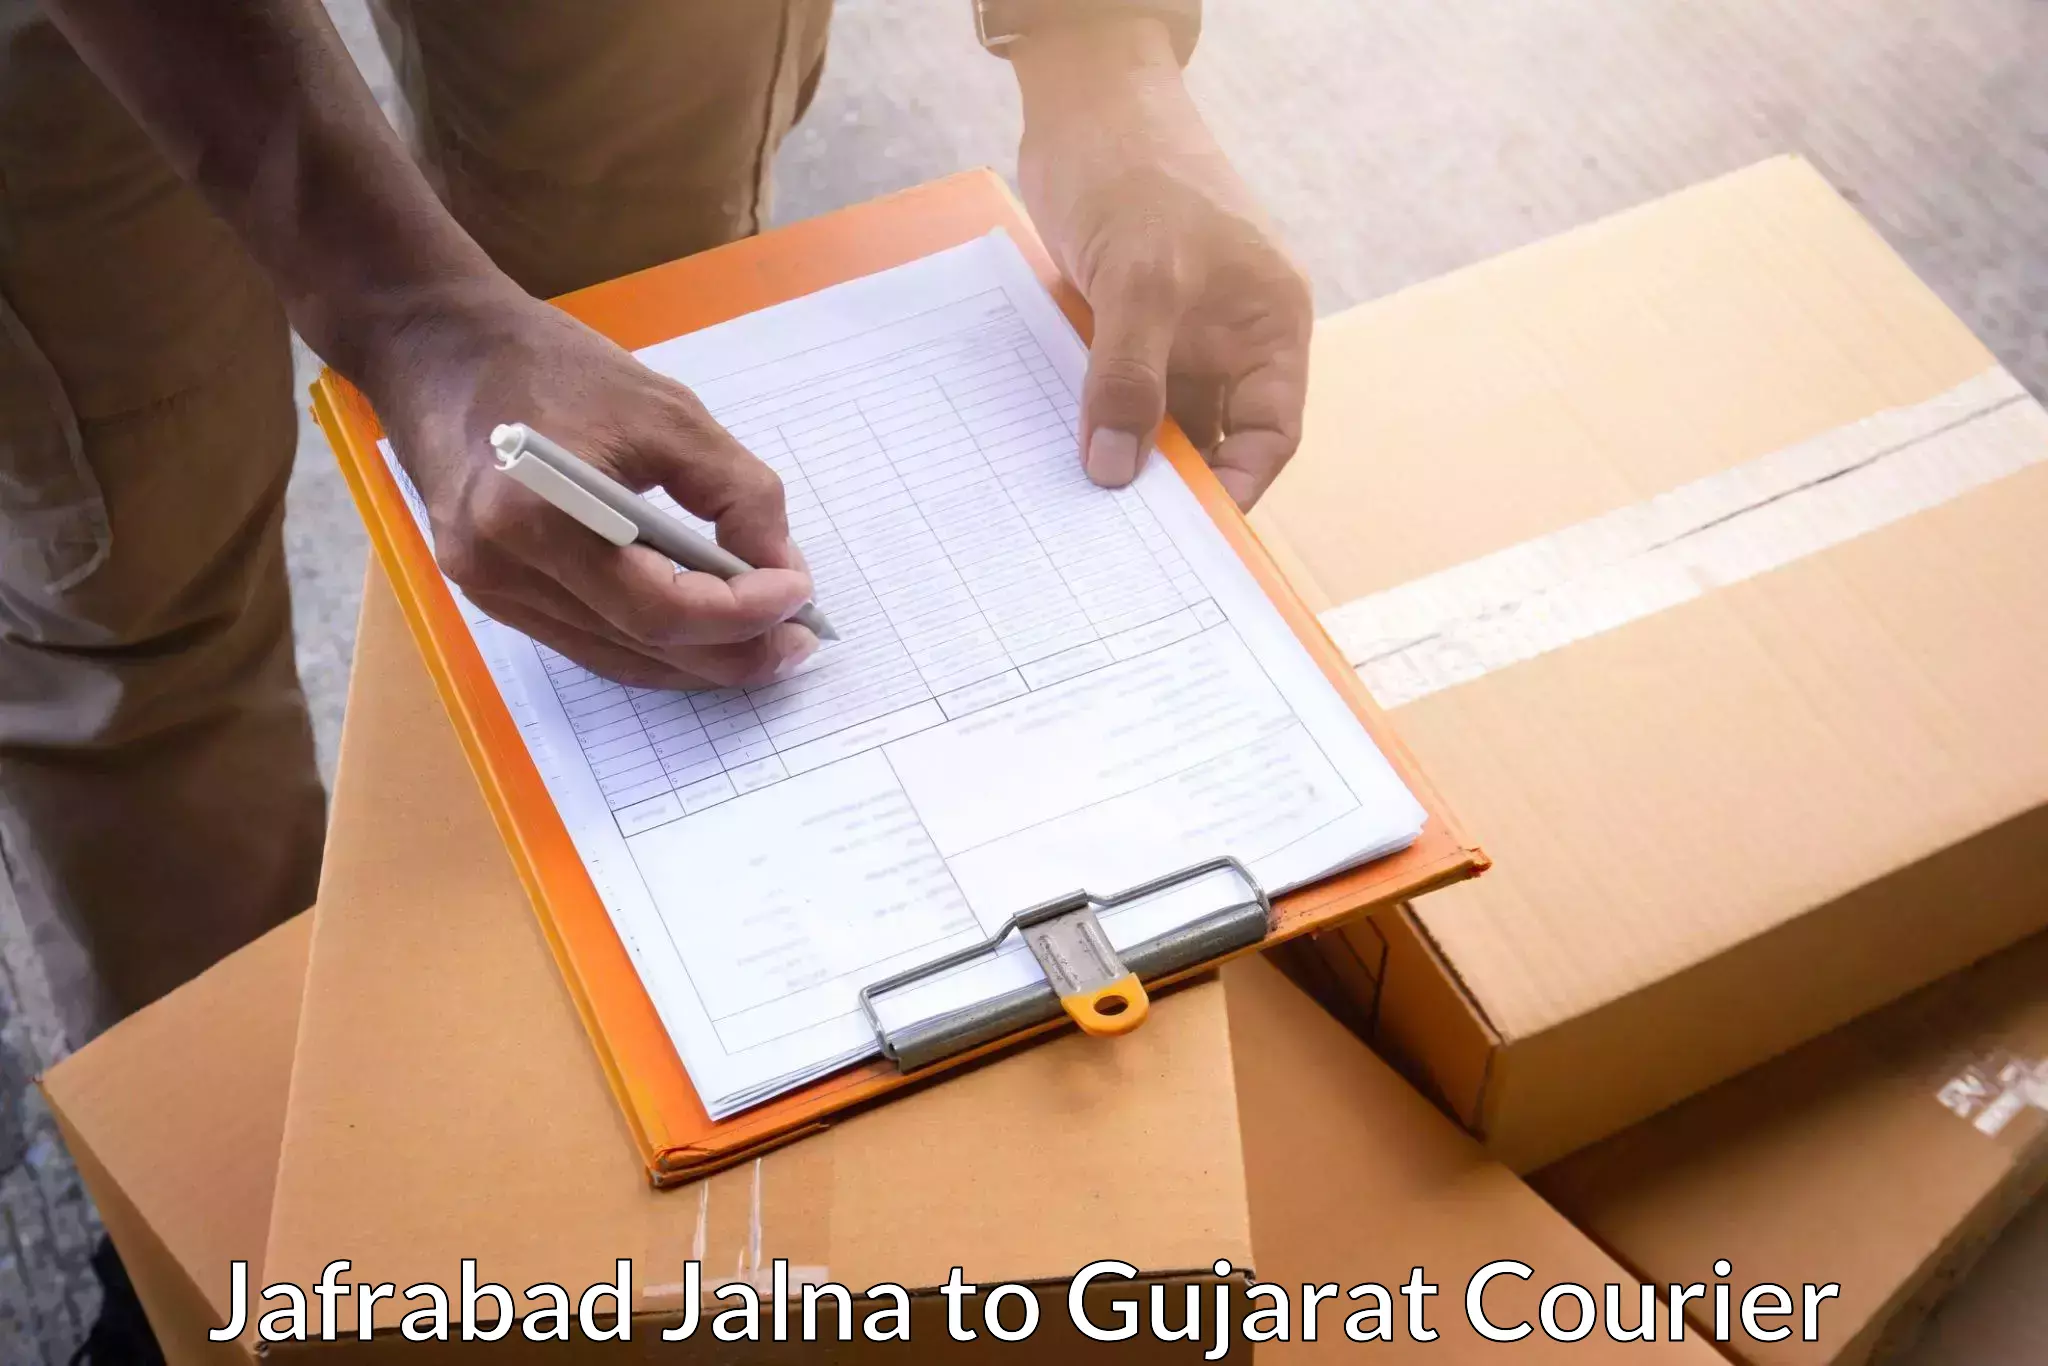 Reliable courier service Jafrabad Jalna to Idar